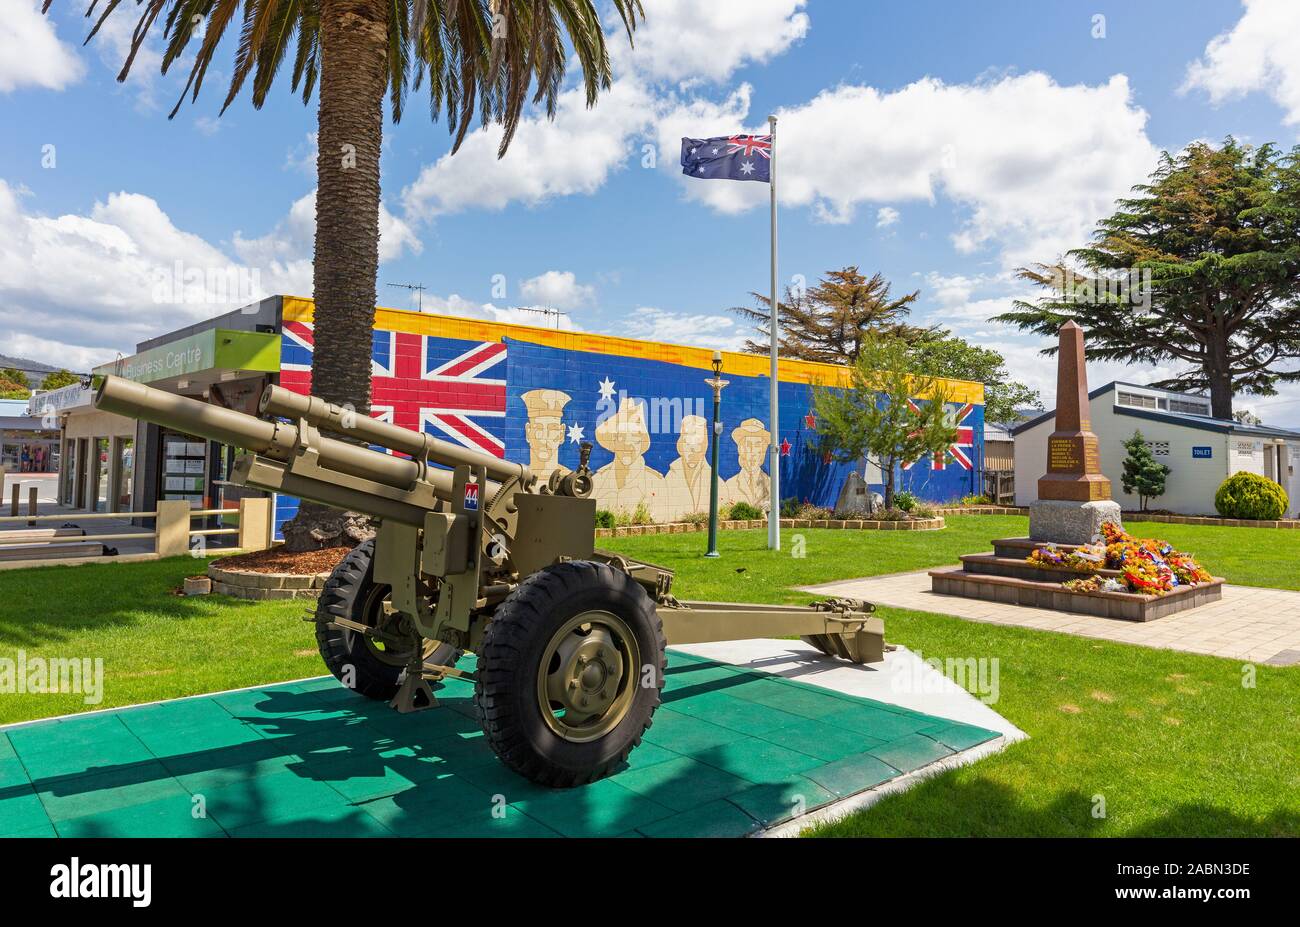 War memorial, St. Helens, Tasmania, Australia.  The memorial commemorates Tasmanians killed in the various conflicts in which Australia has been invol Stock Photo